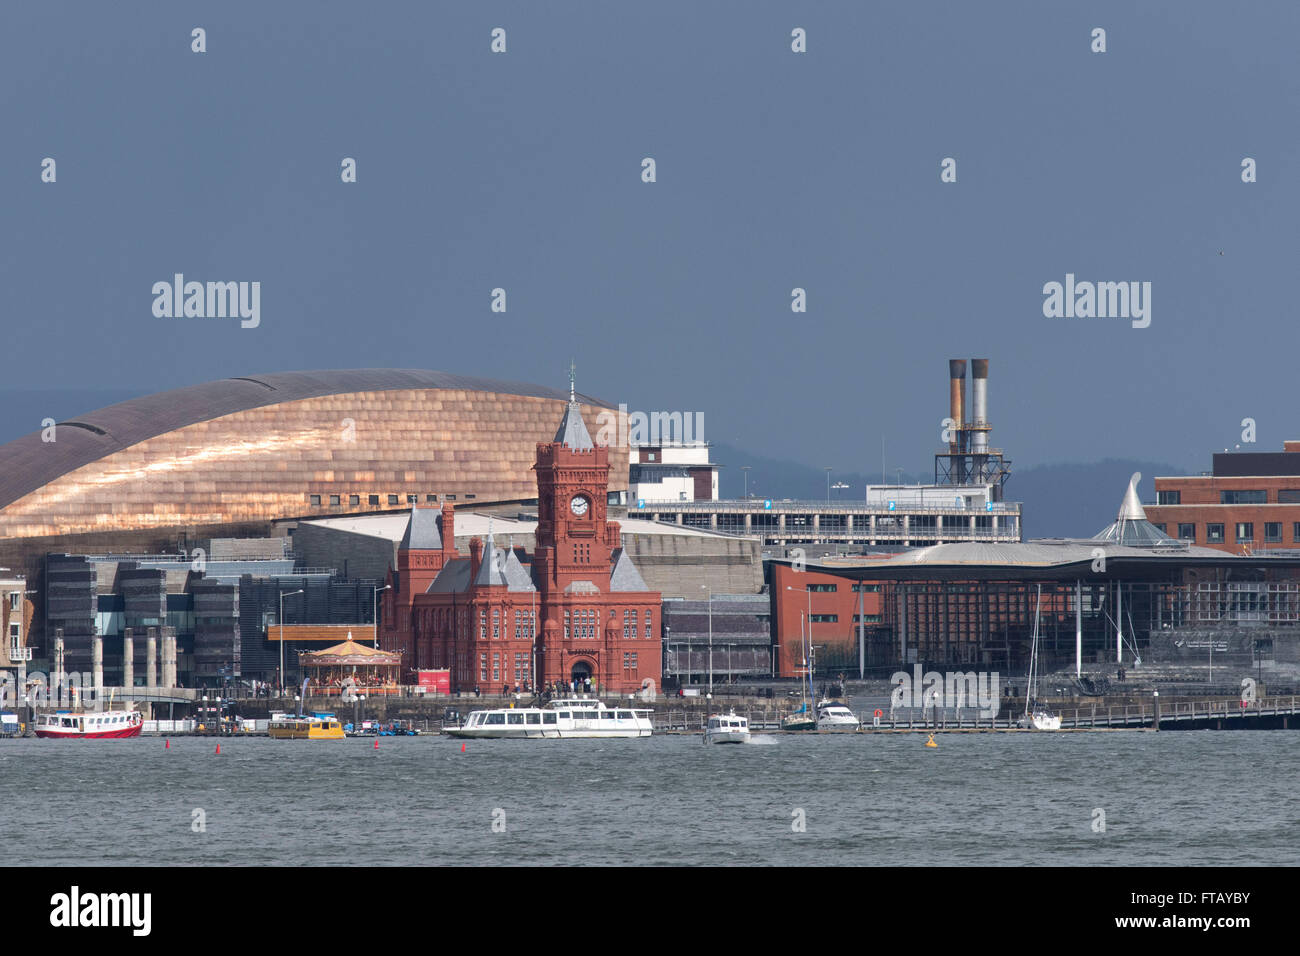 The Pierhead building and Wales Millennium Centre (WMC) at Cardiff Bay, south Wales, UK. Stock Photo